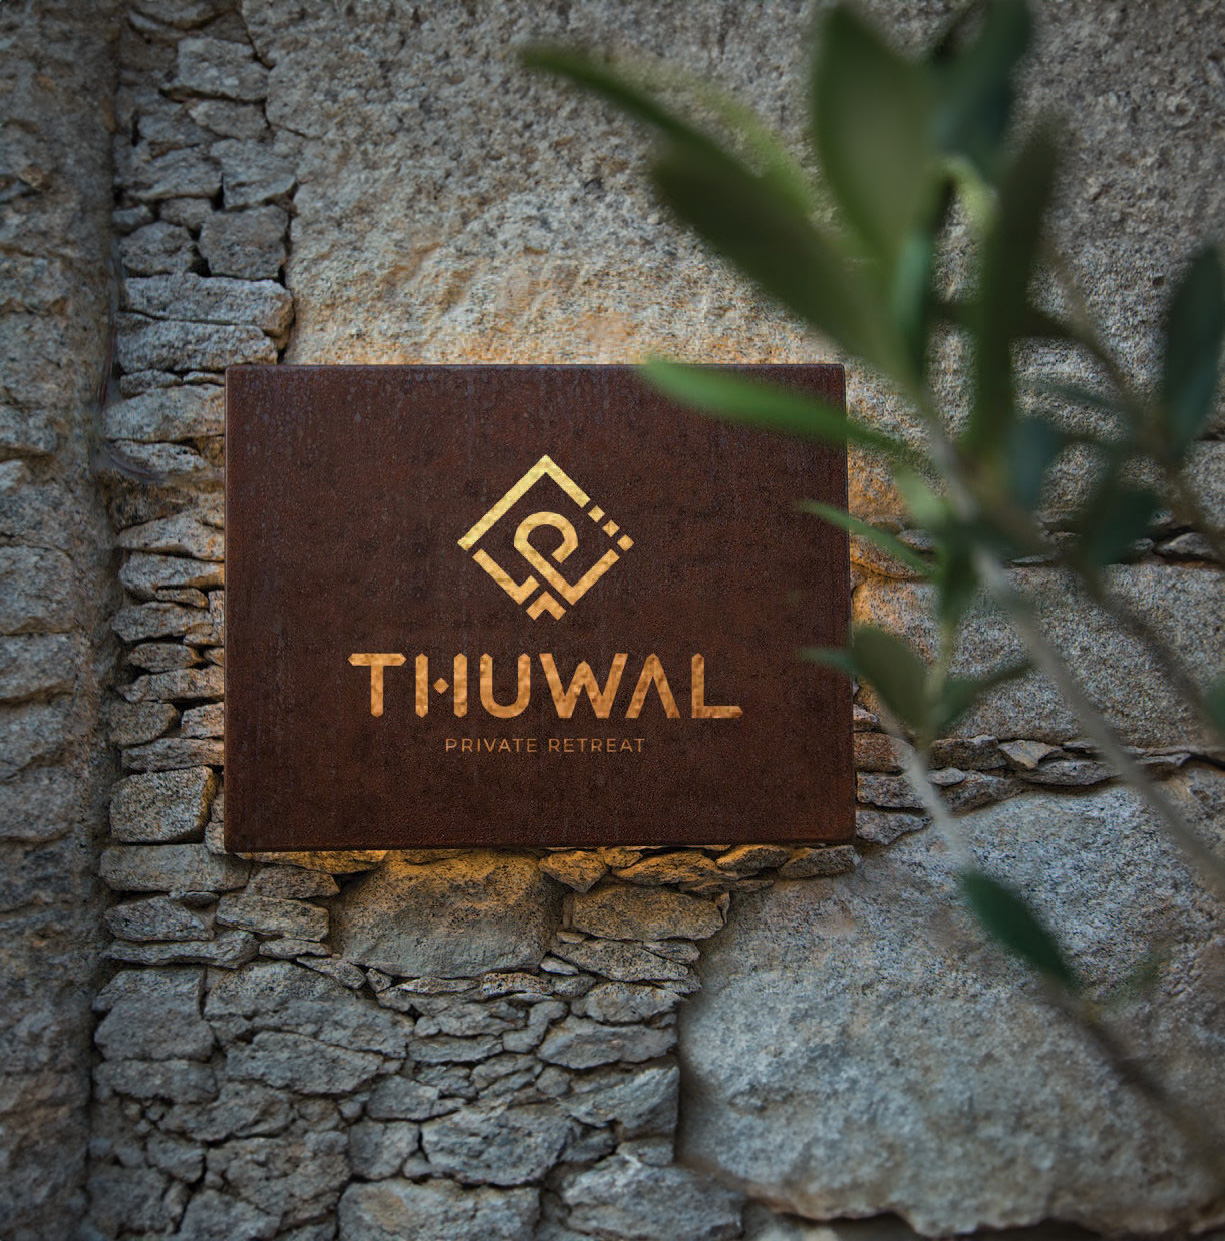 A brown plate written on it “Thuwal private retreat"